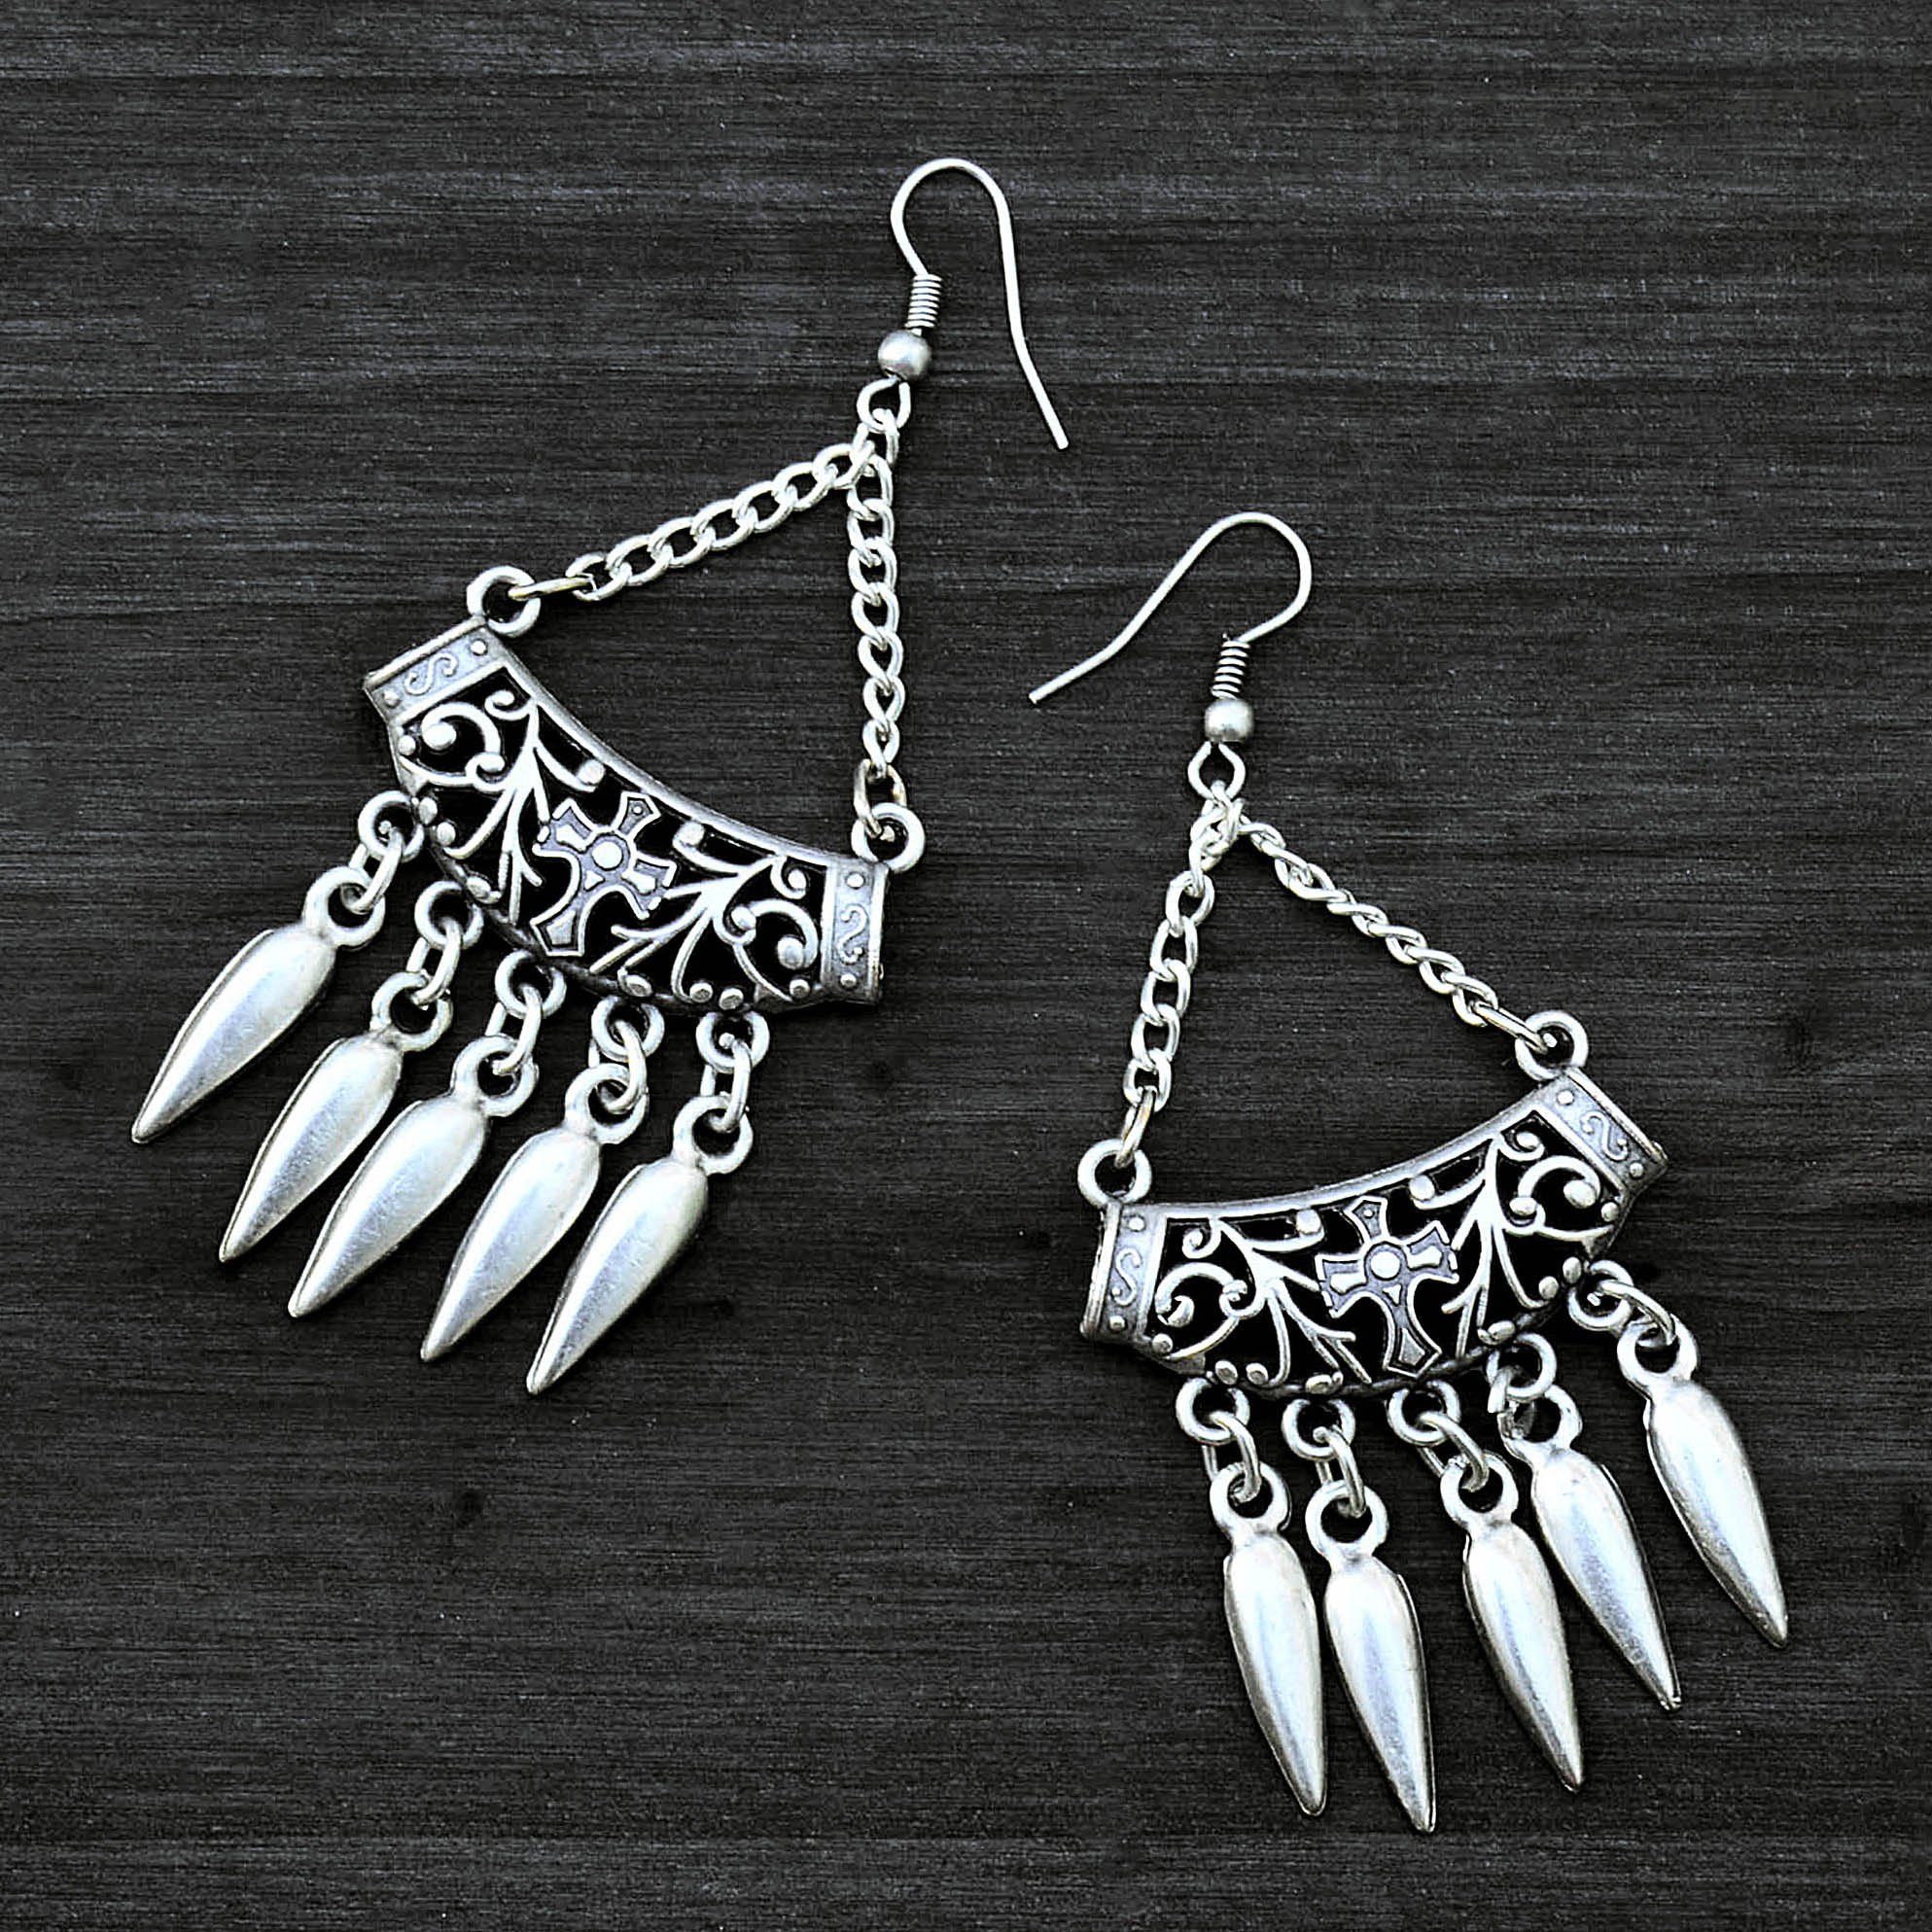 Gothic hanging earrings